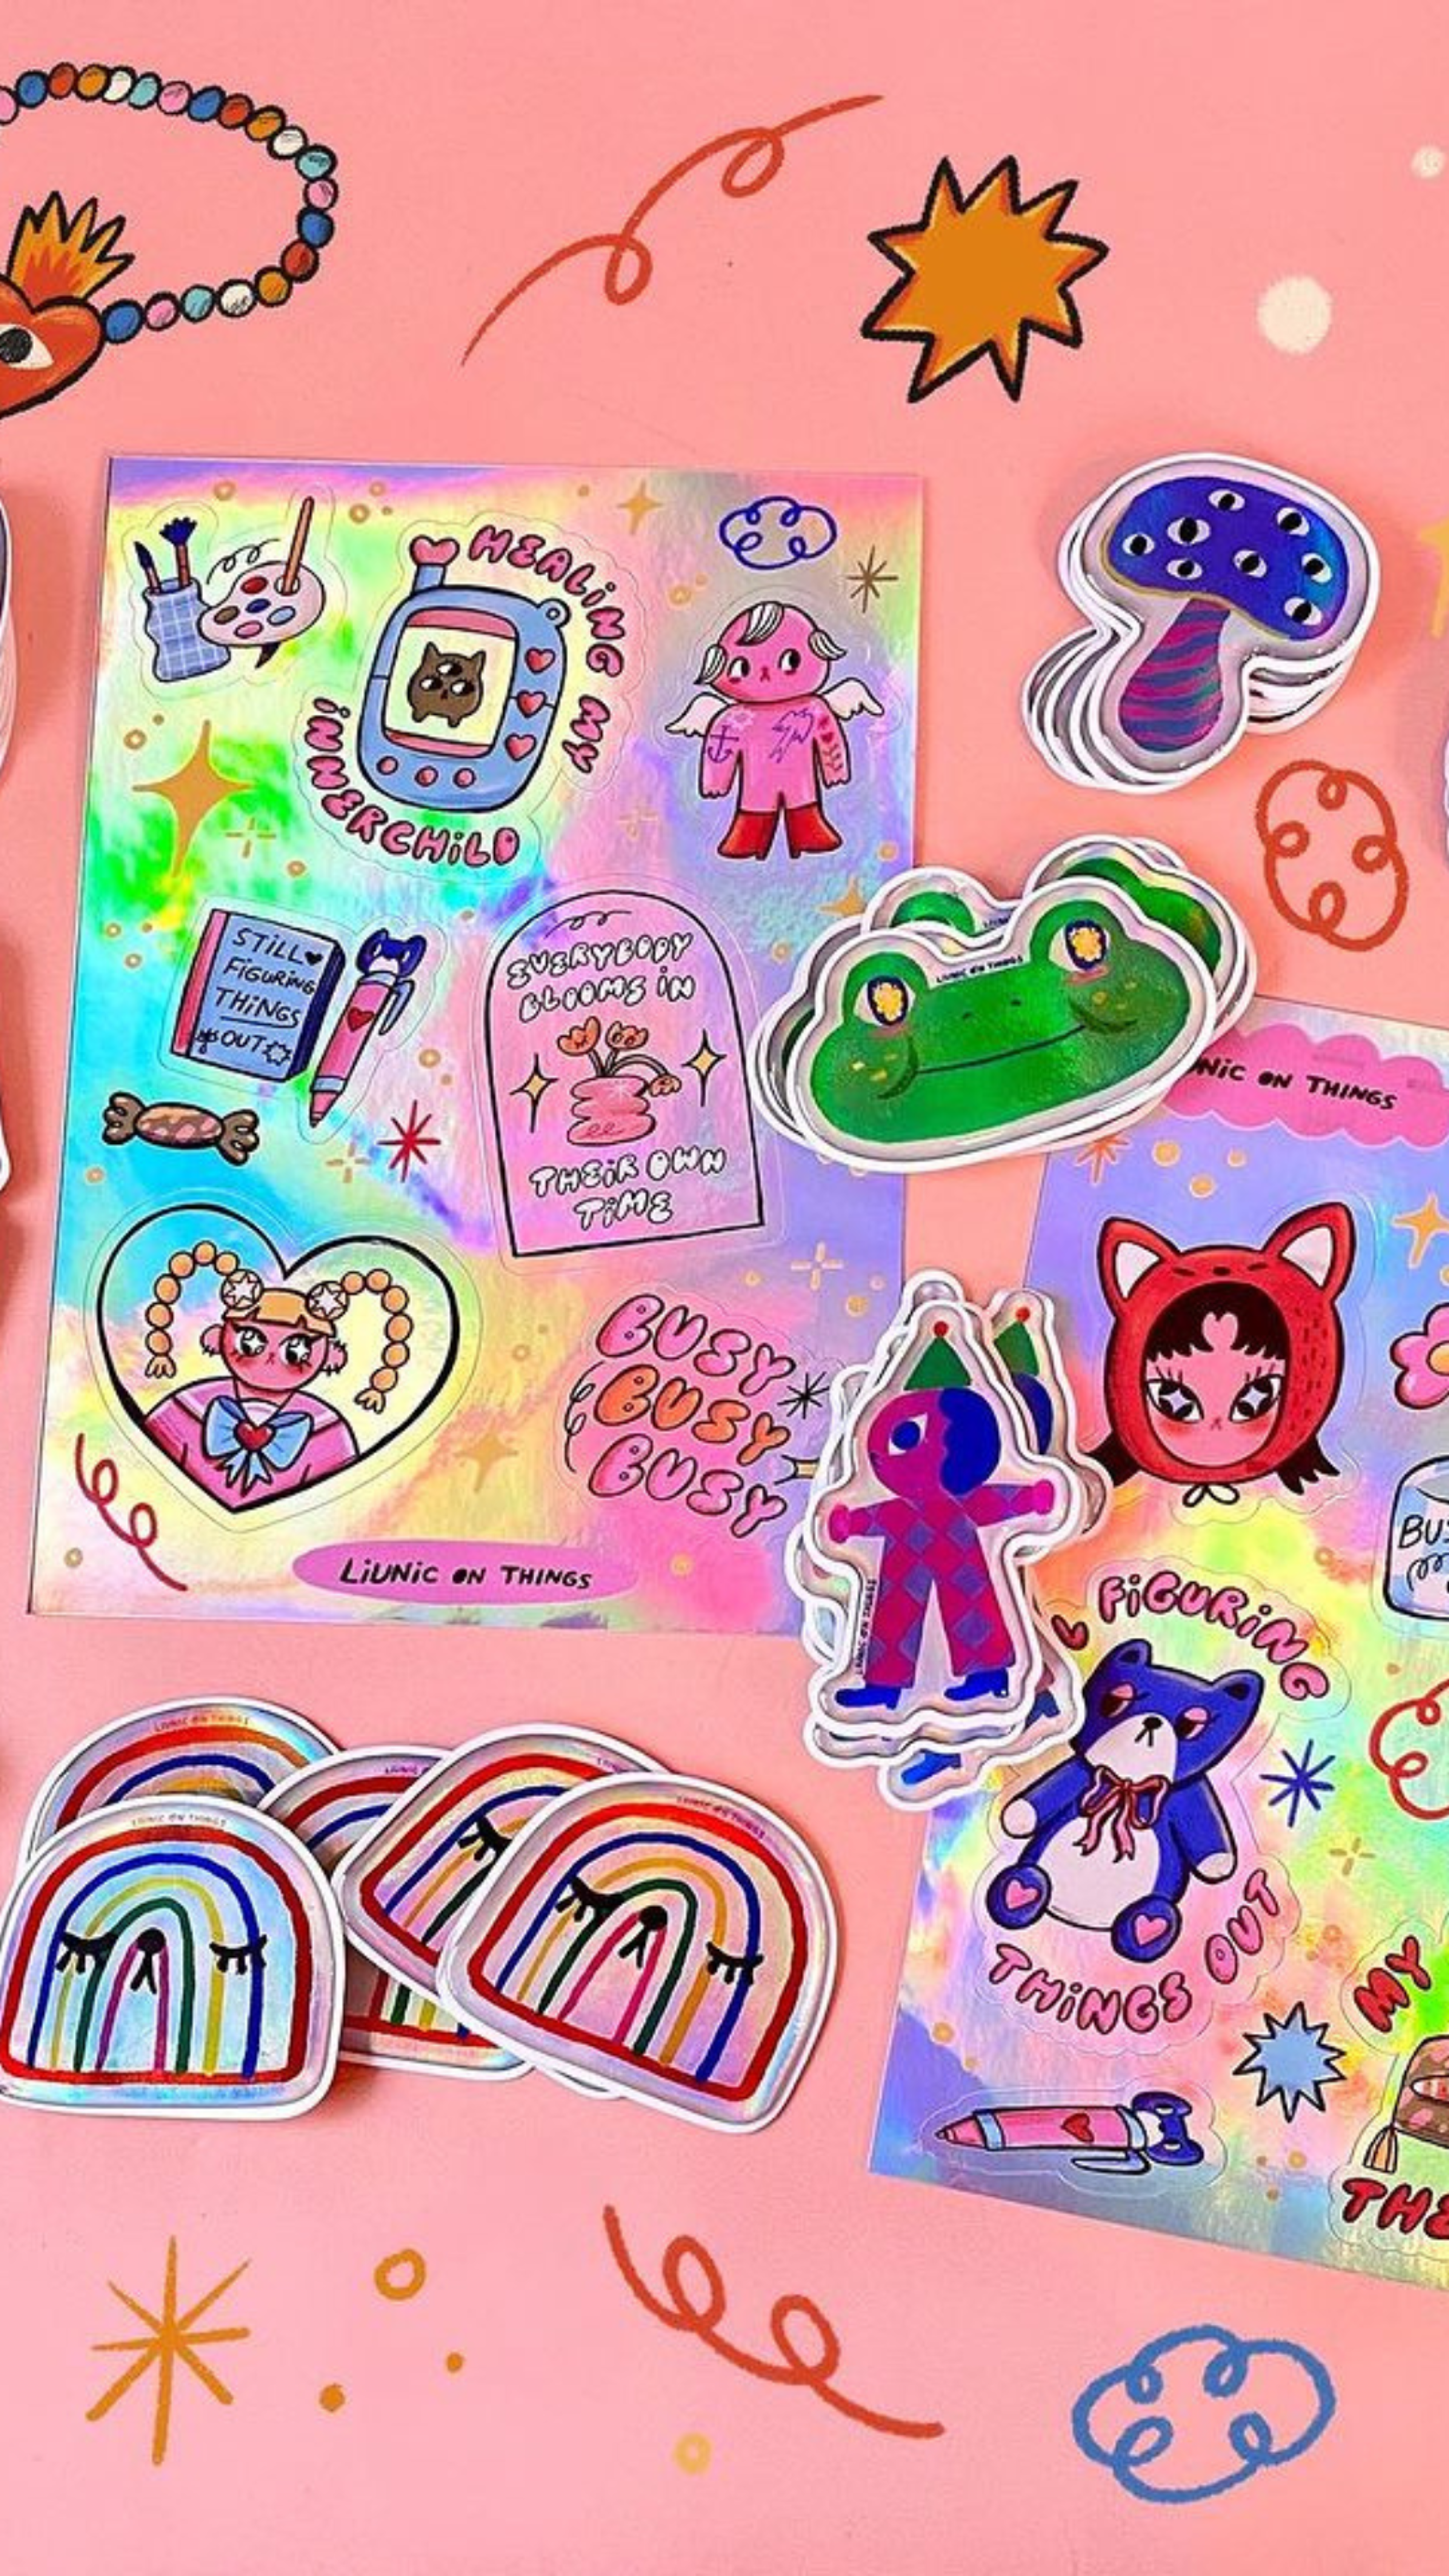  A vibrant assortment of playful stickers featuring rainbows, characters, and positive messages on a pink background.